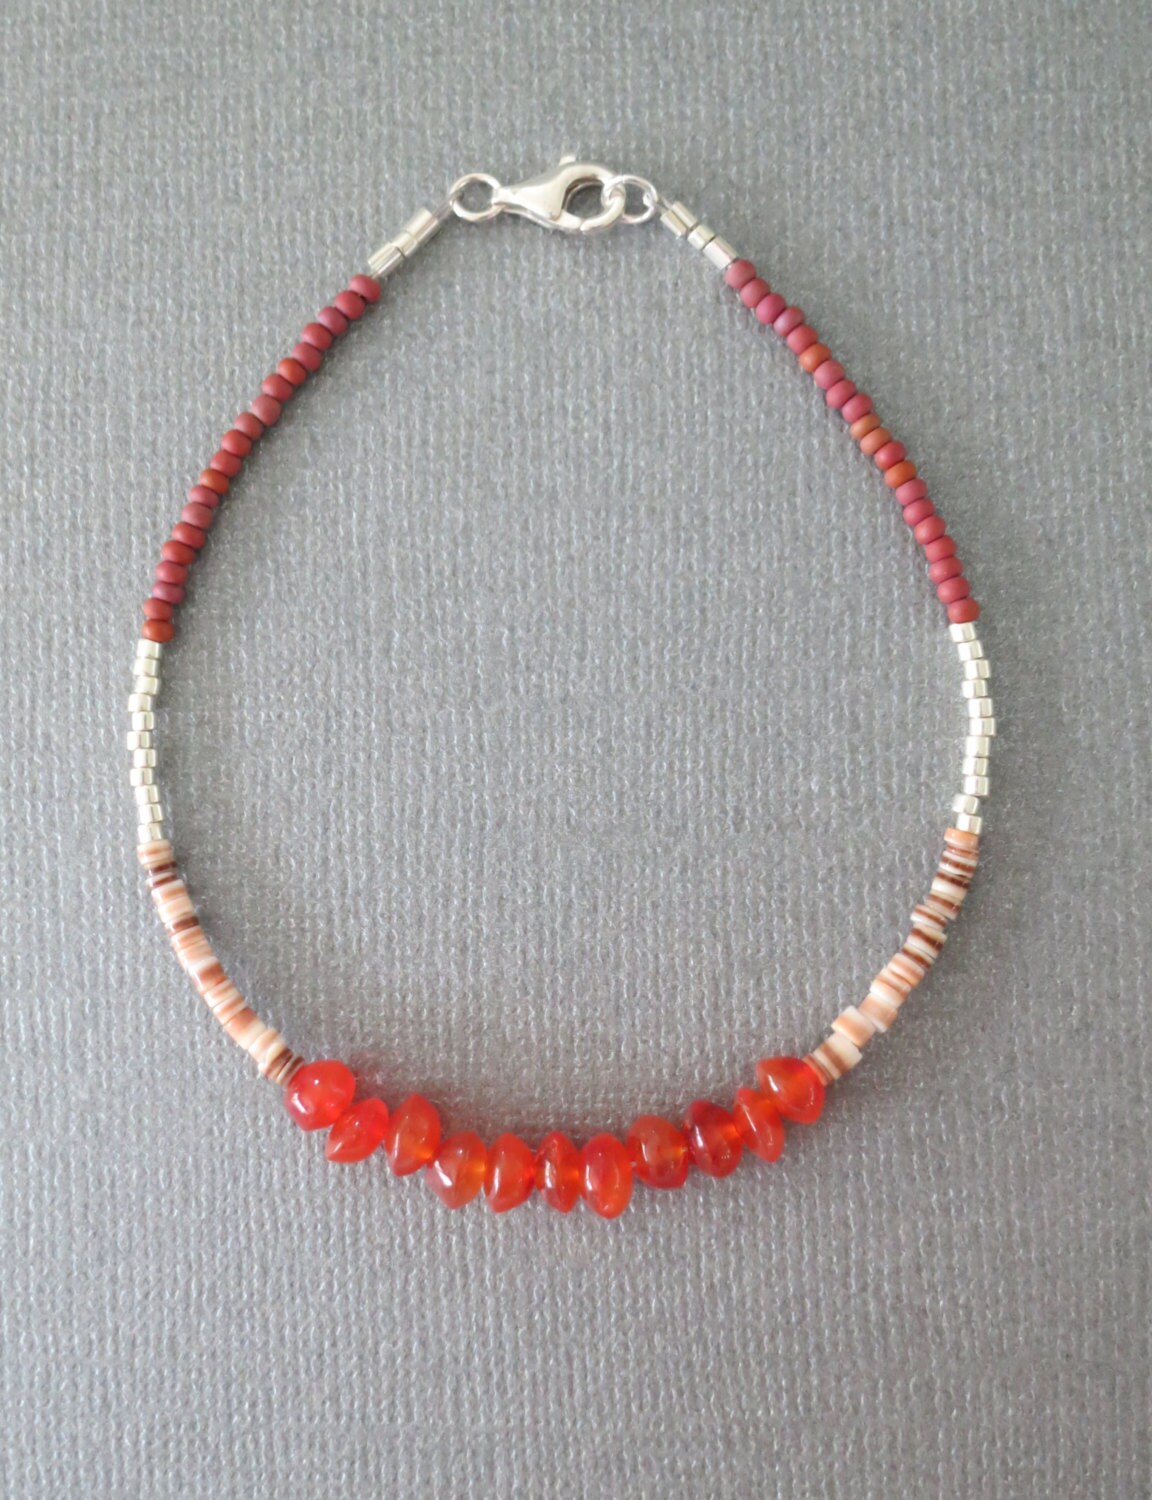 Carnelian Gemstones and Shell Beads marz Dust - Etsy